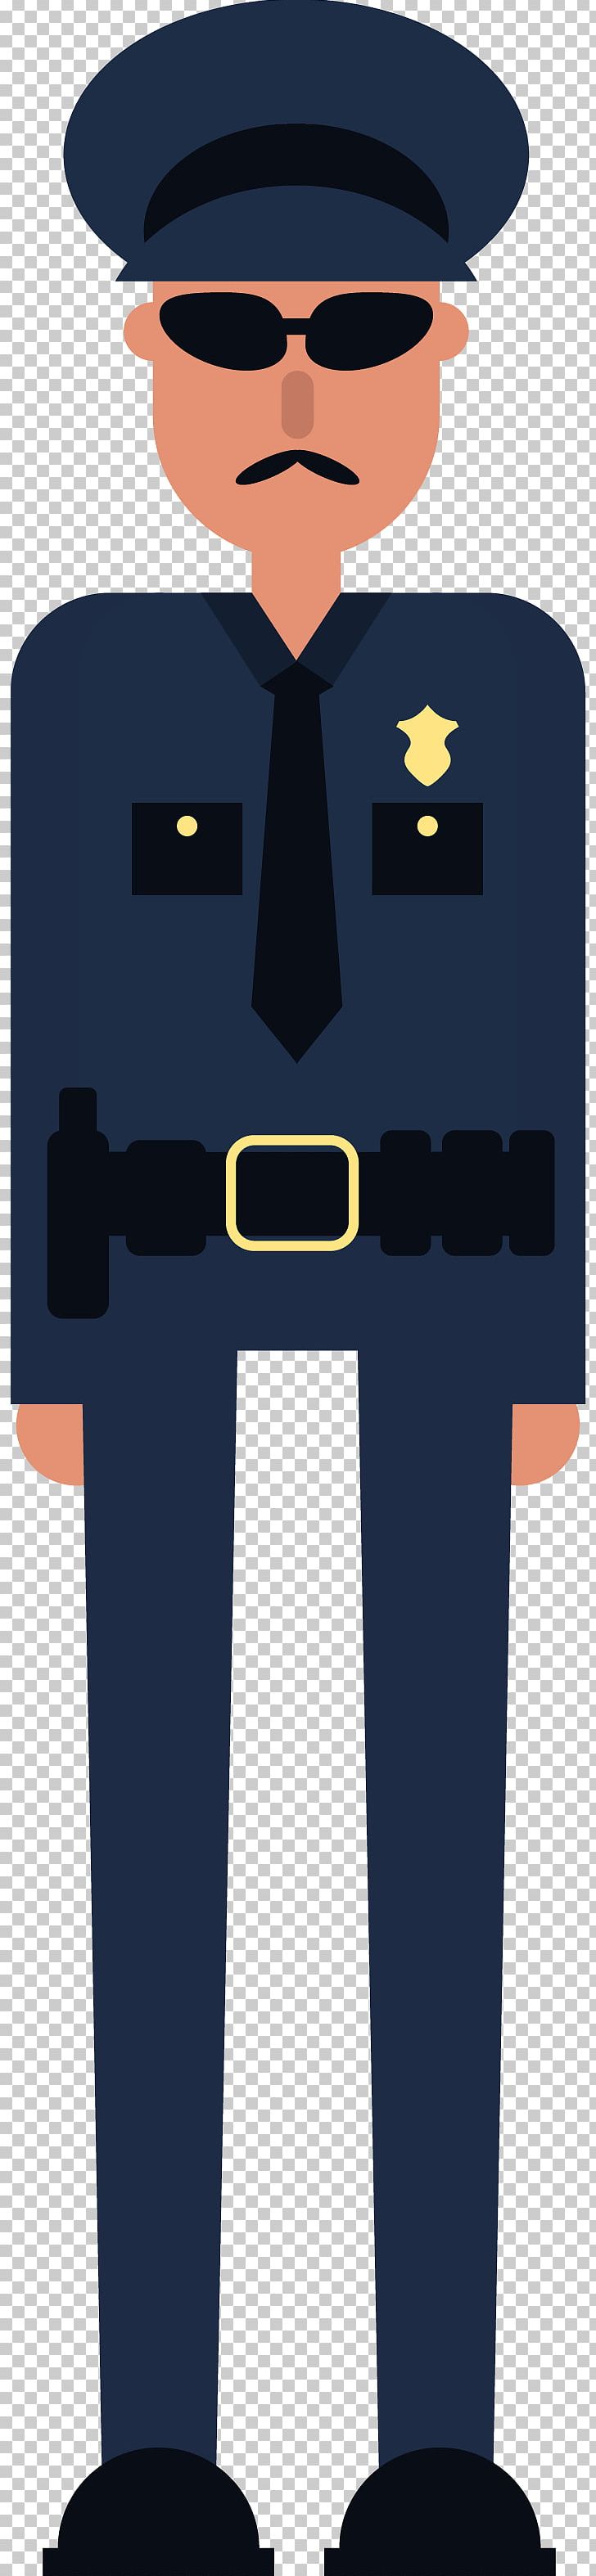 Police Officer Cartoon PNG, Clipart, Army Officer, Chief, Cop, Criminal, Criminal Police Free PNG Download